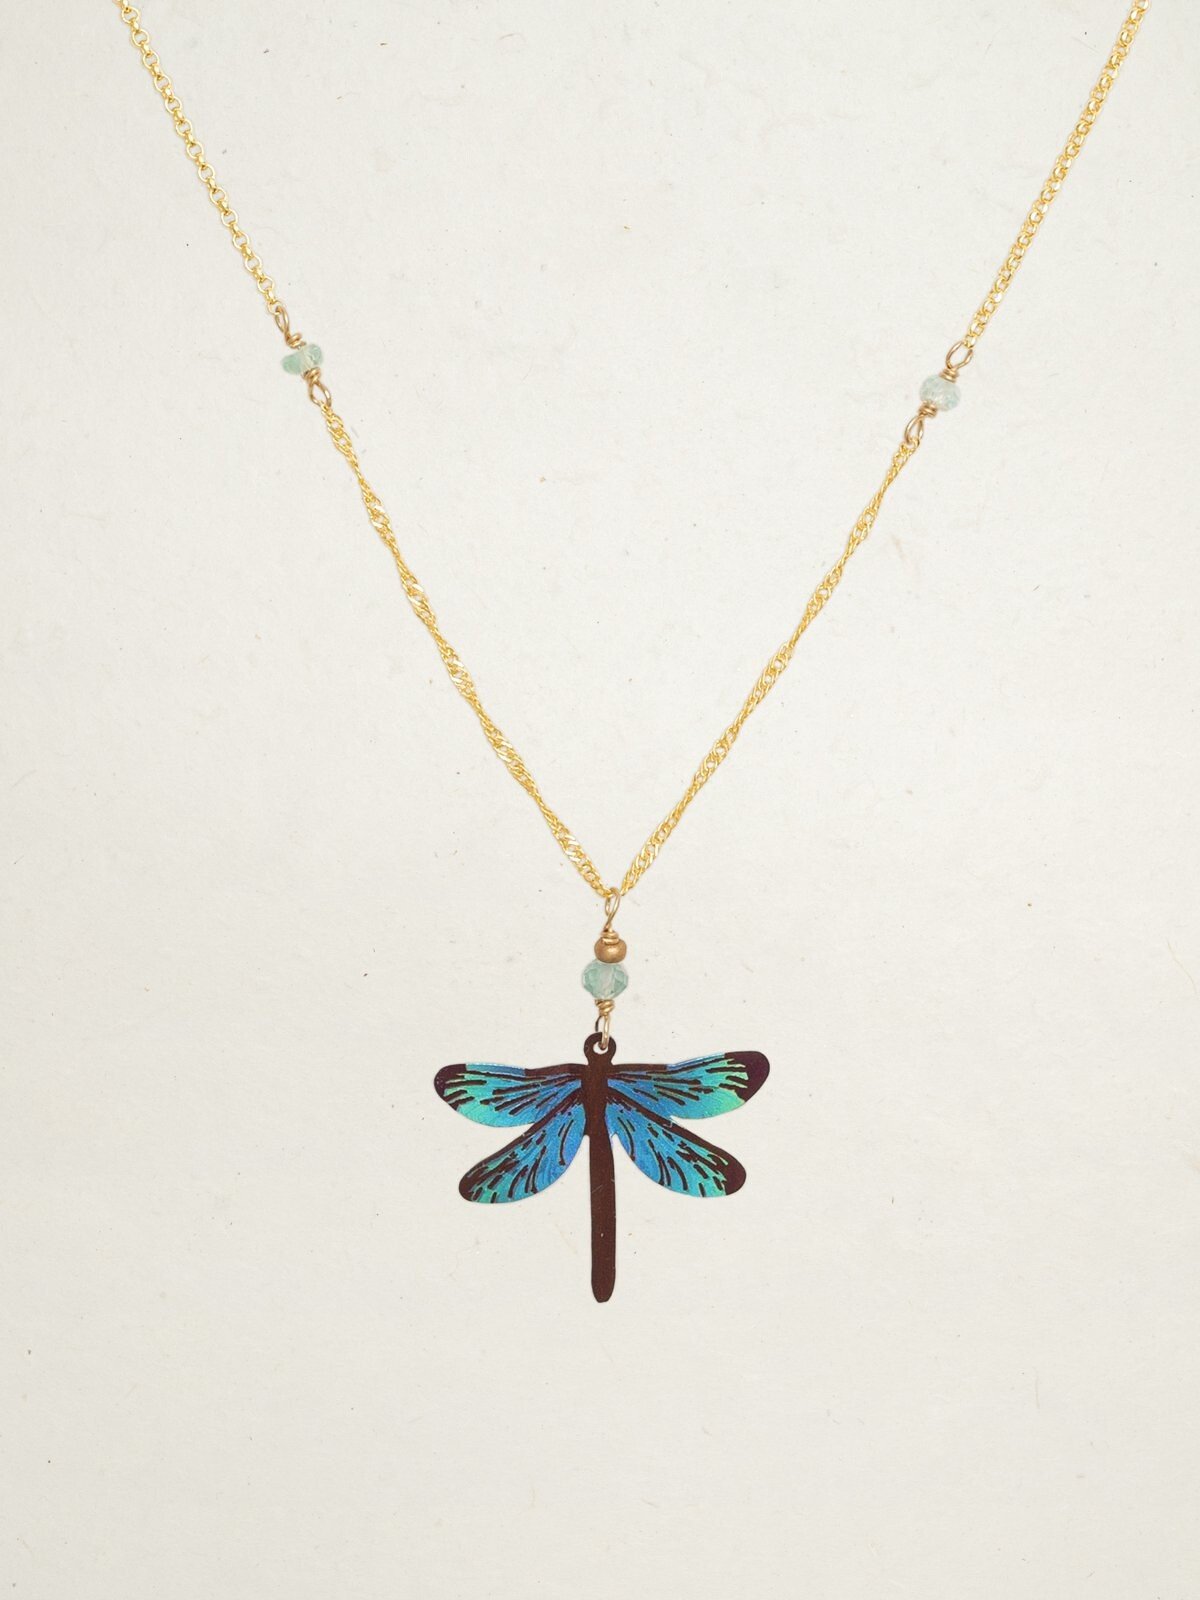 Holly Yashi Dragonfly Dreams Pendant Necklace - Turquoise    